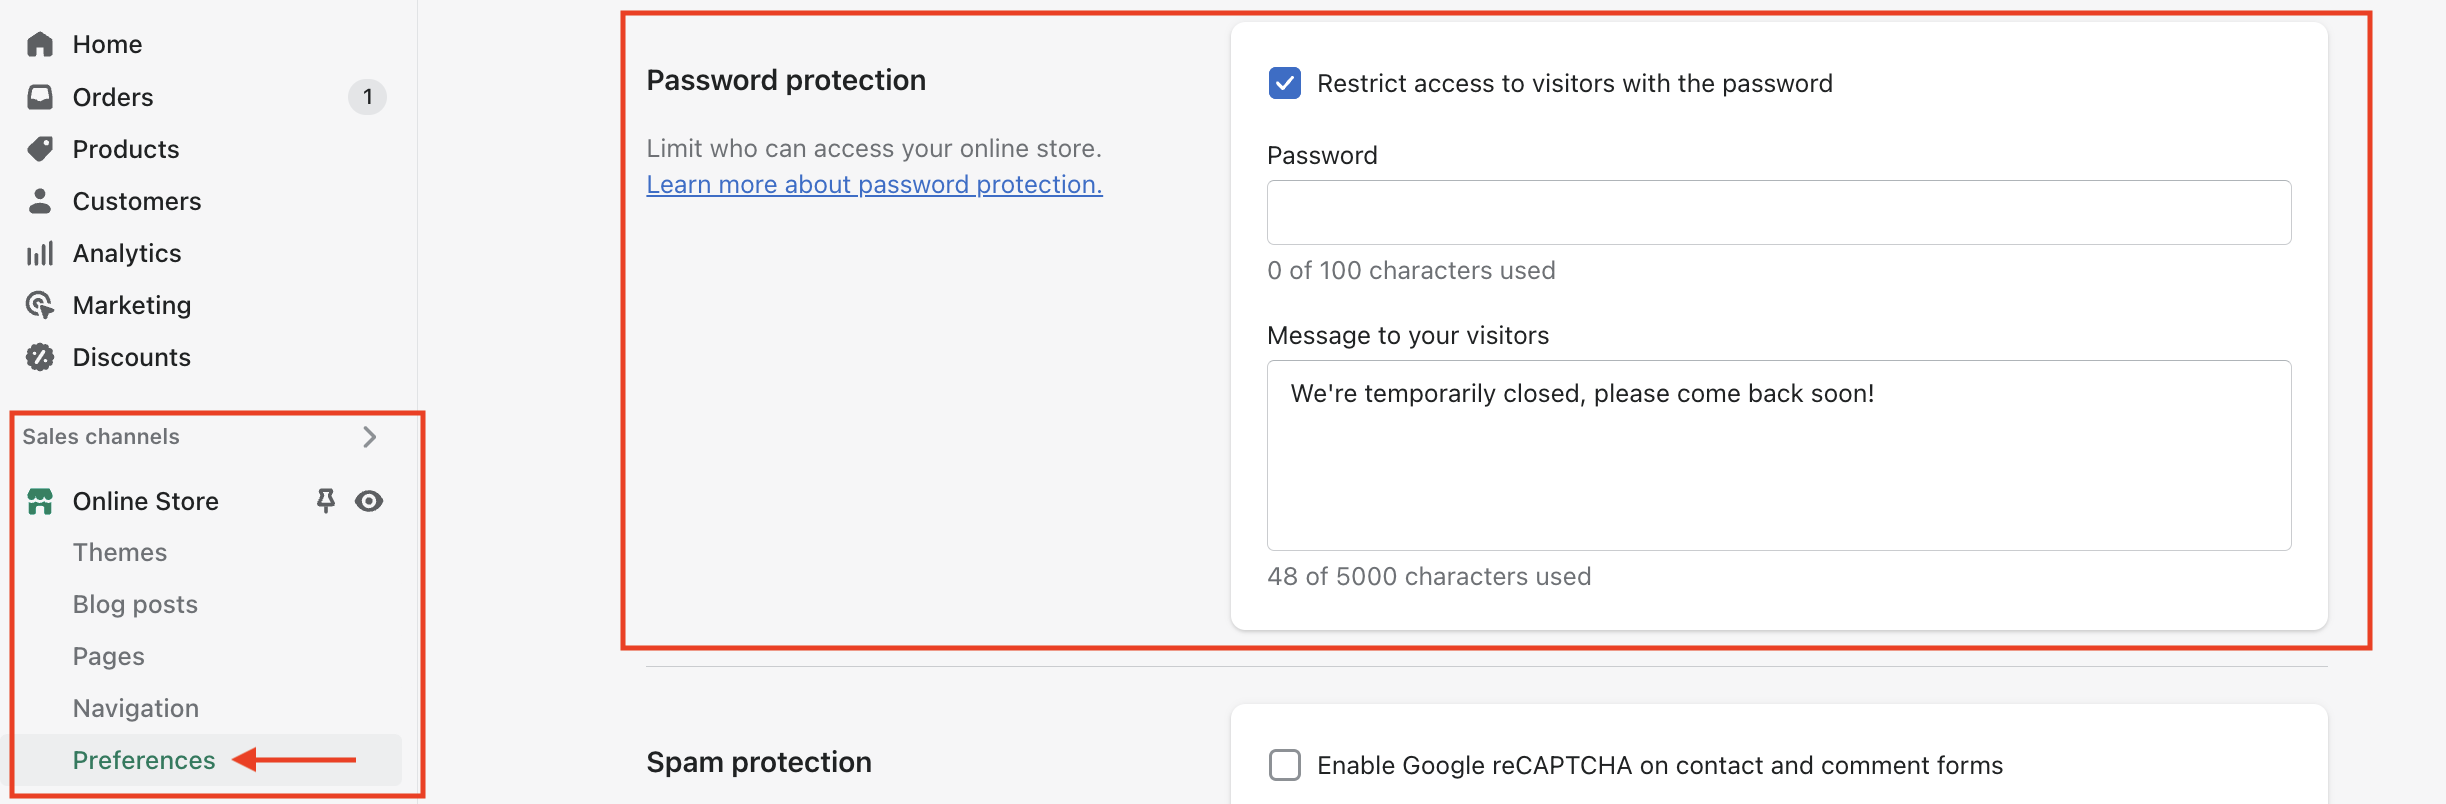 A screenshot of Shopify showing how and where to add a password to your store: Online store > Preferences > Password protection